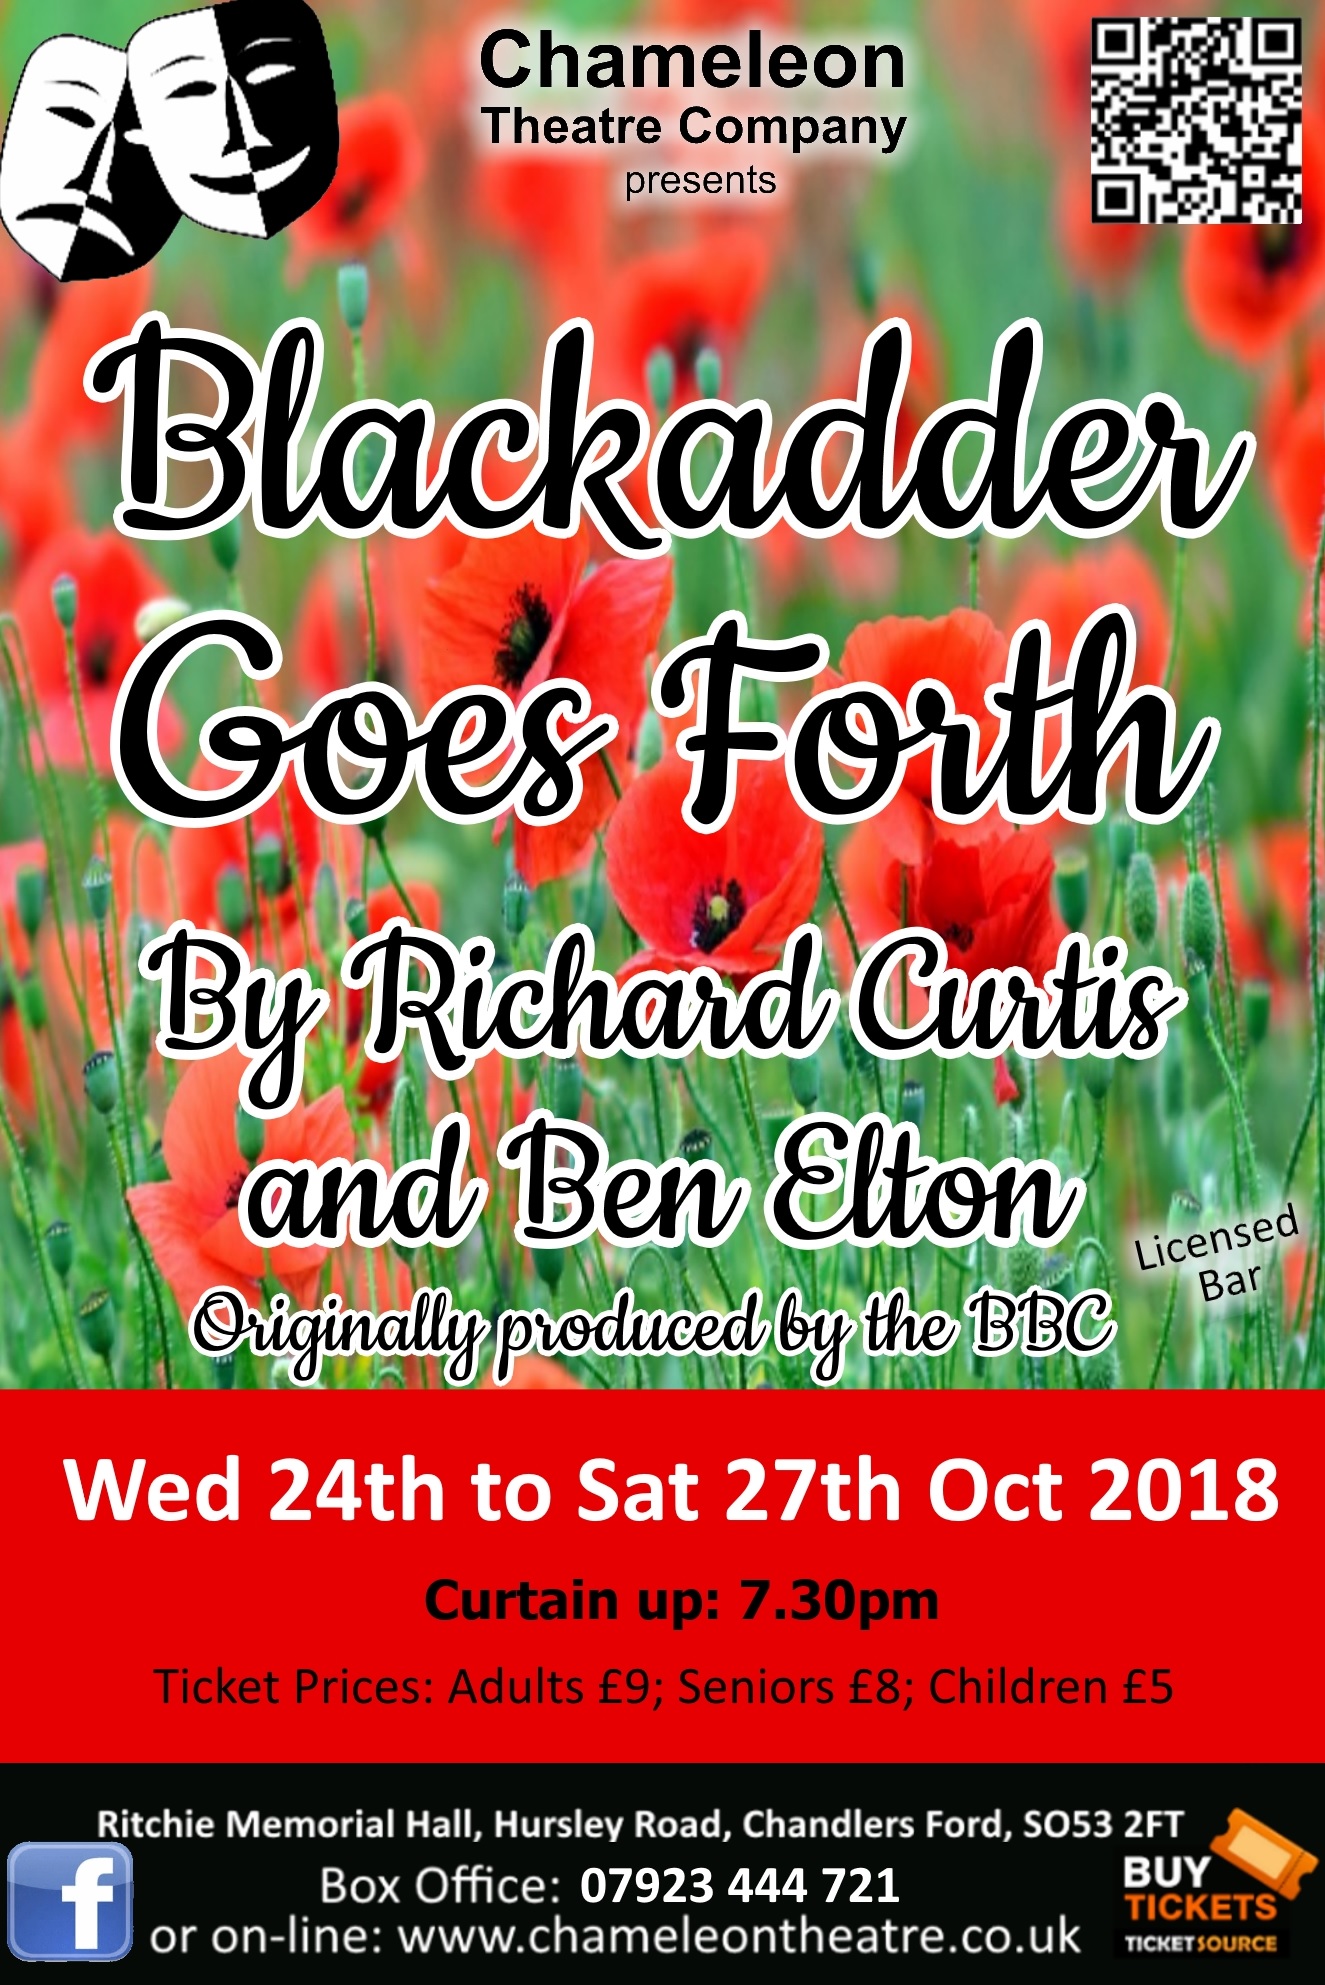 Blackadder Comes To Chandlers Ford